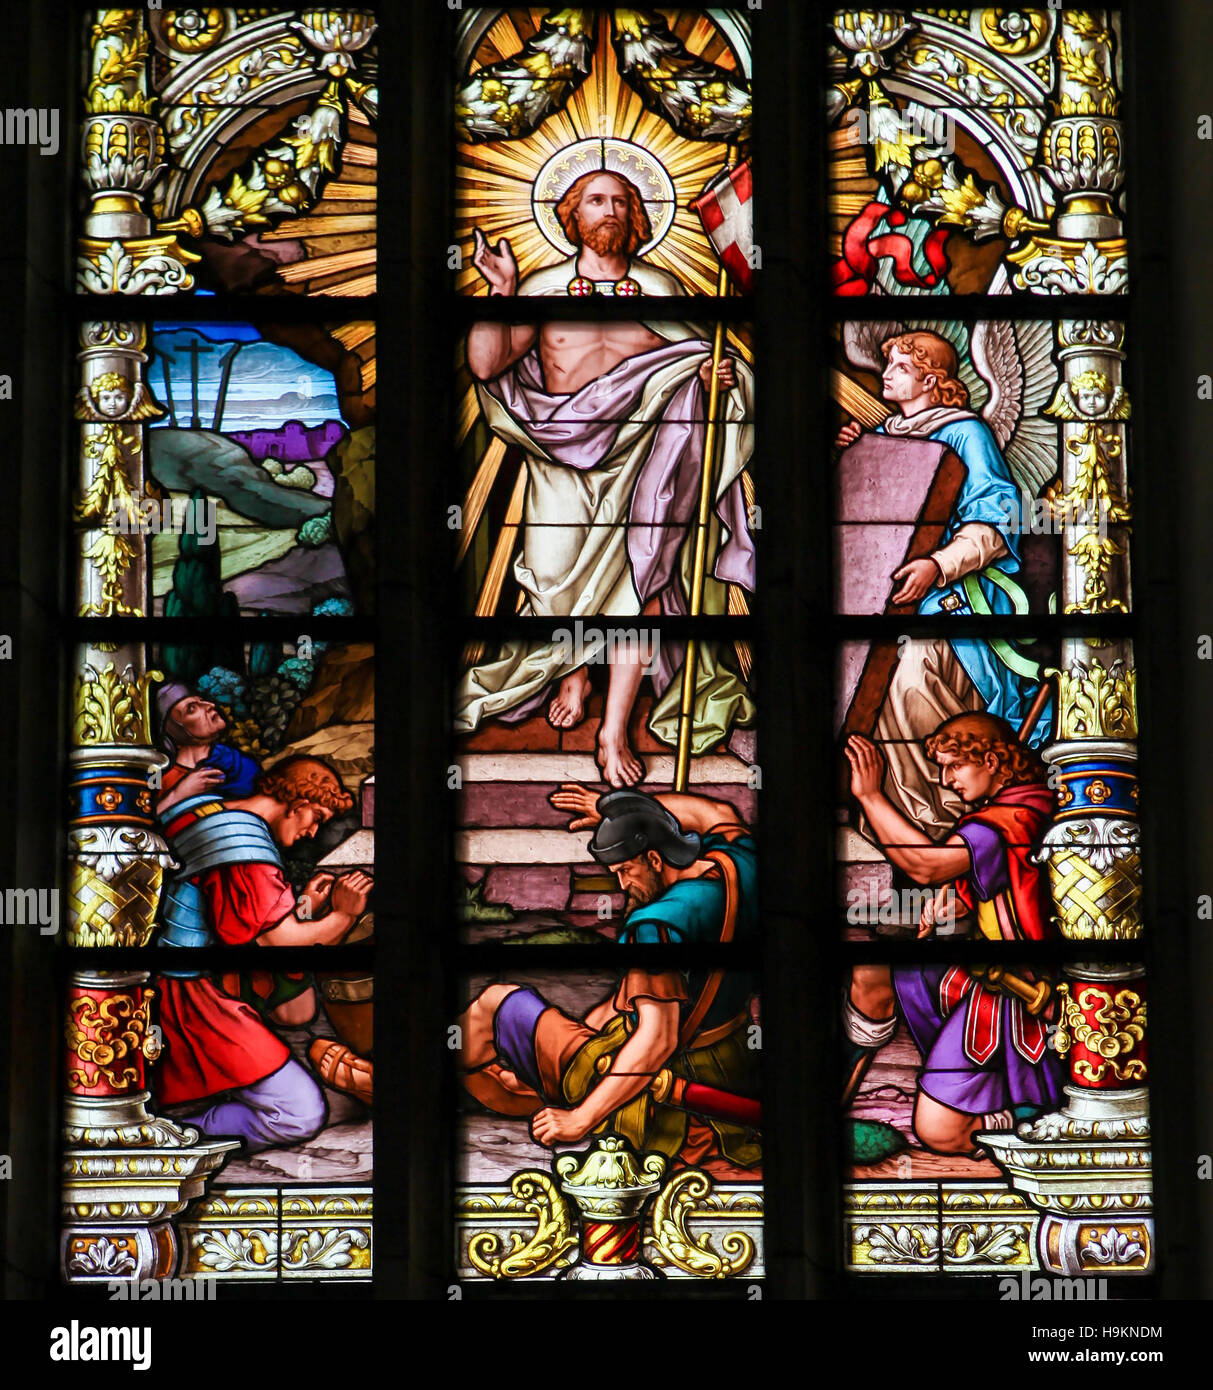 Resurrection of Jesus Christ from the grave, stained glass window in Saint James' church of Stockholm. Stock Photo